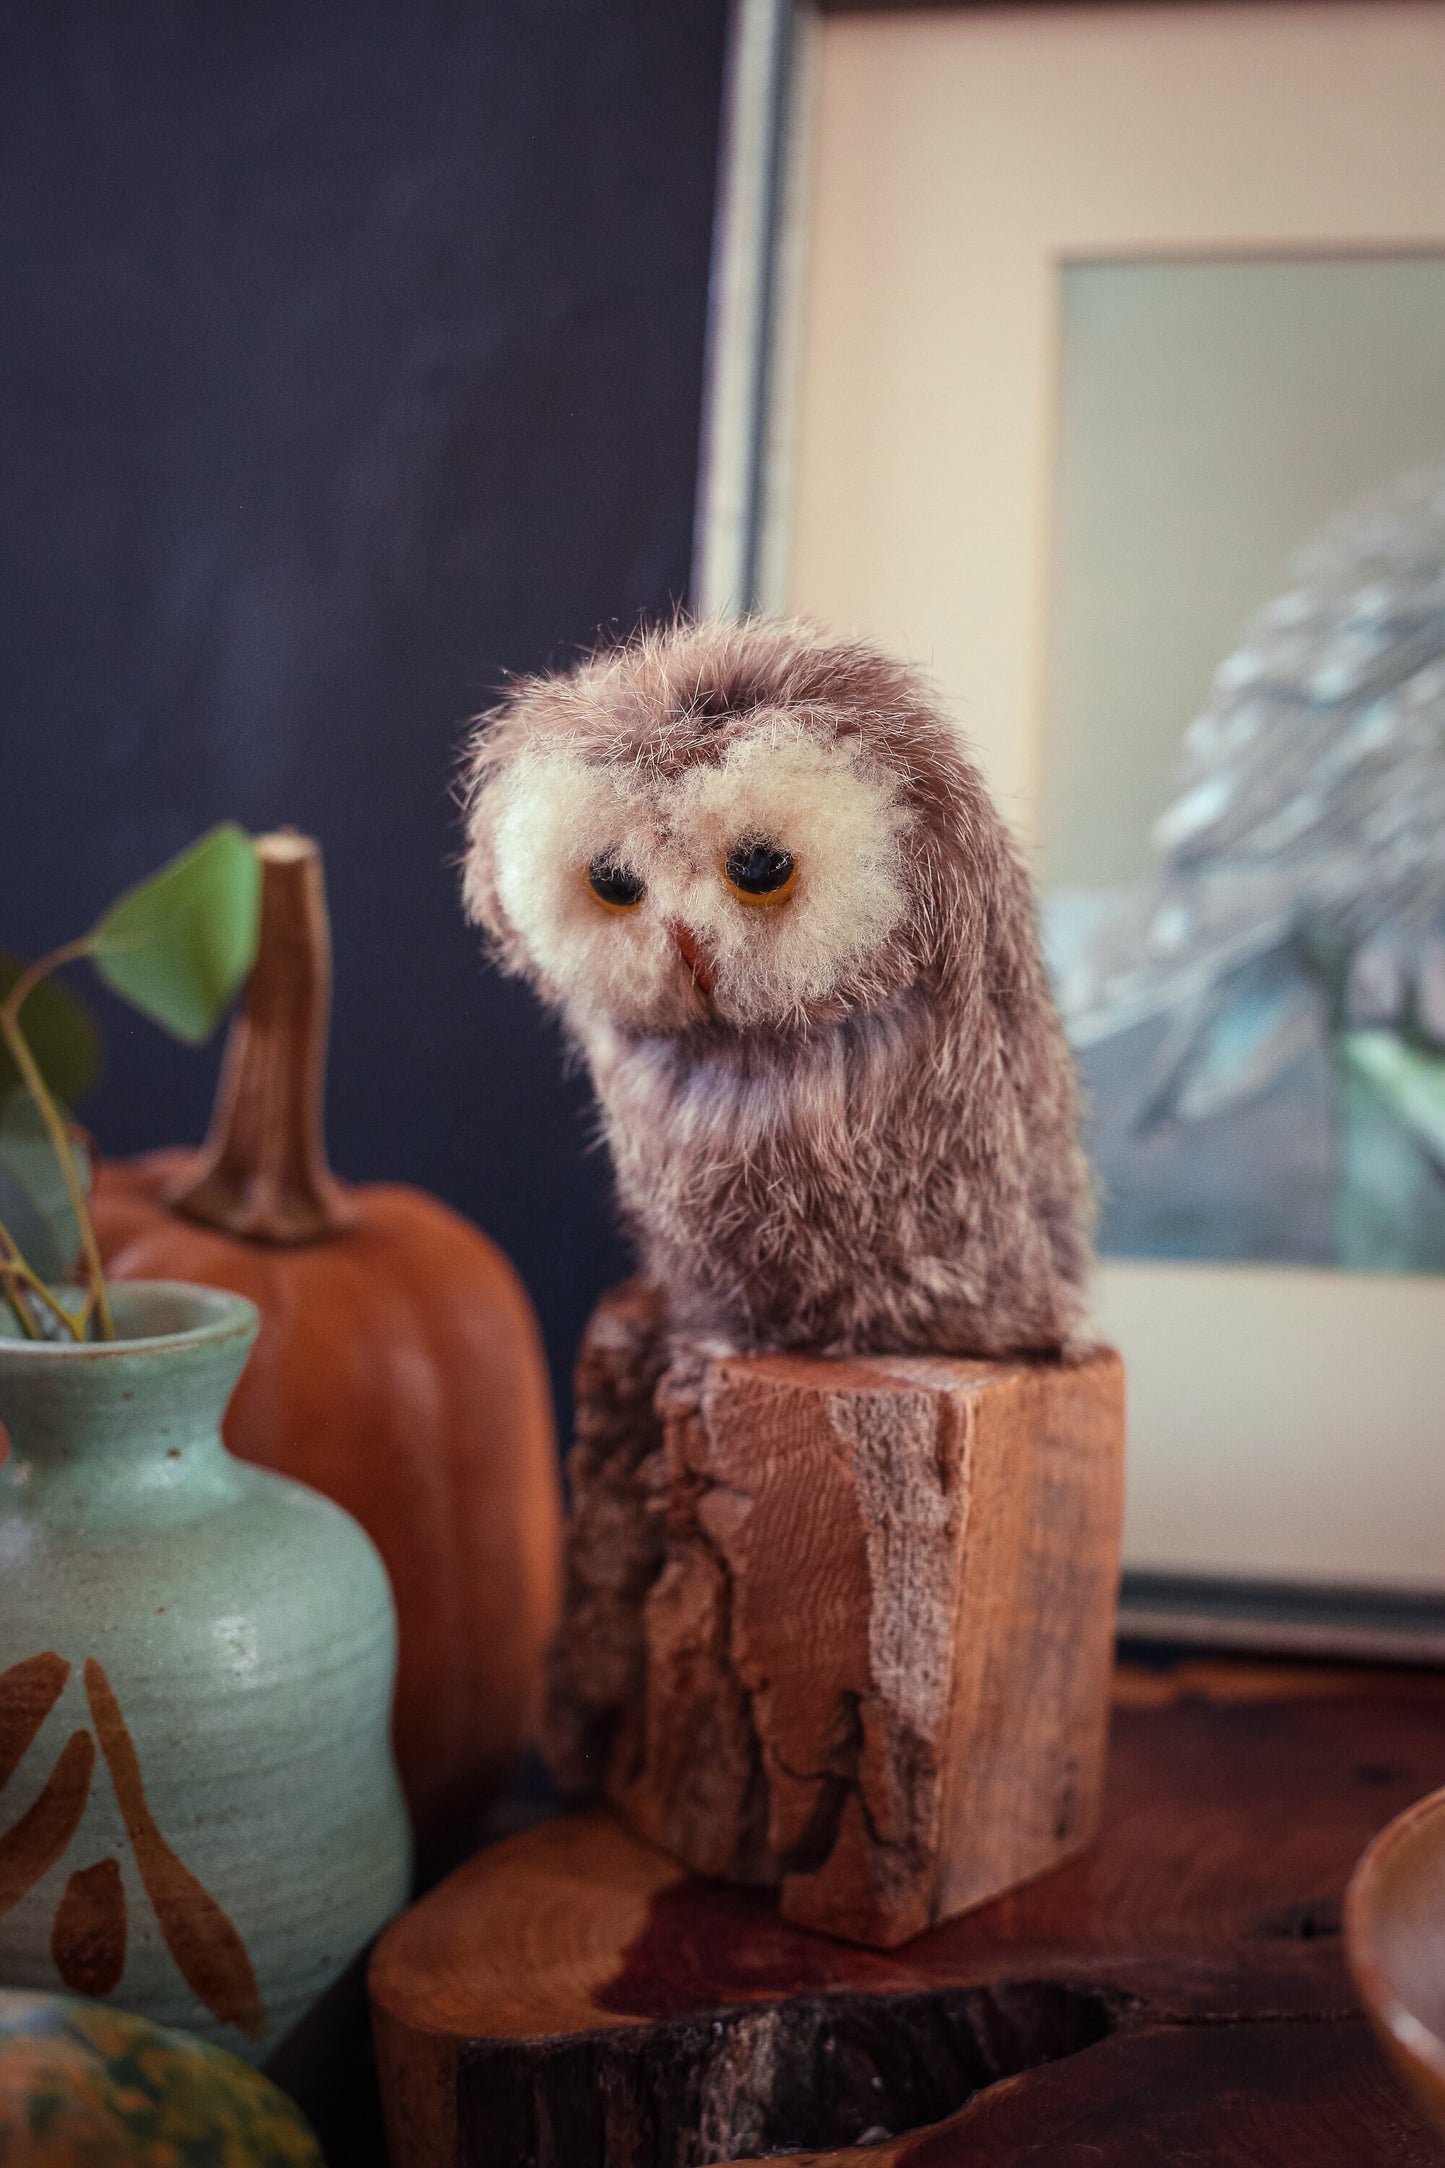 Rustic Owl perched on Log Art Object - Vintage Owl Figure in Fur and Wood